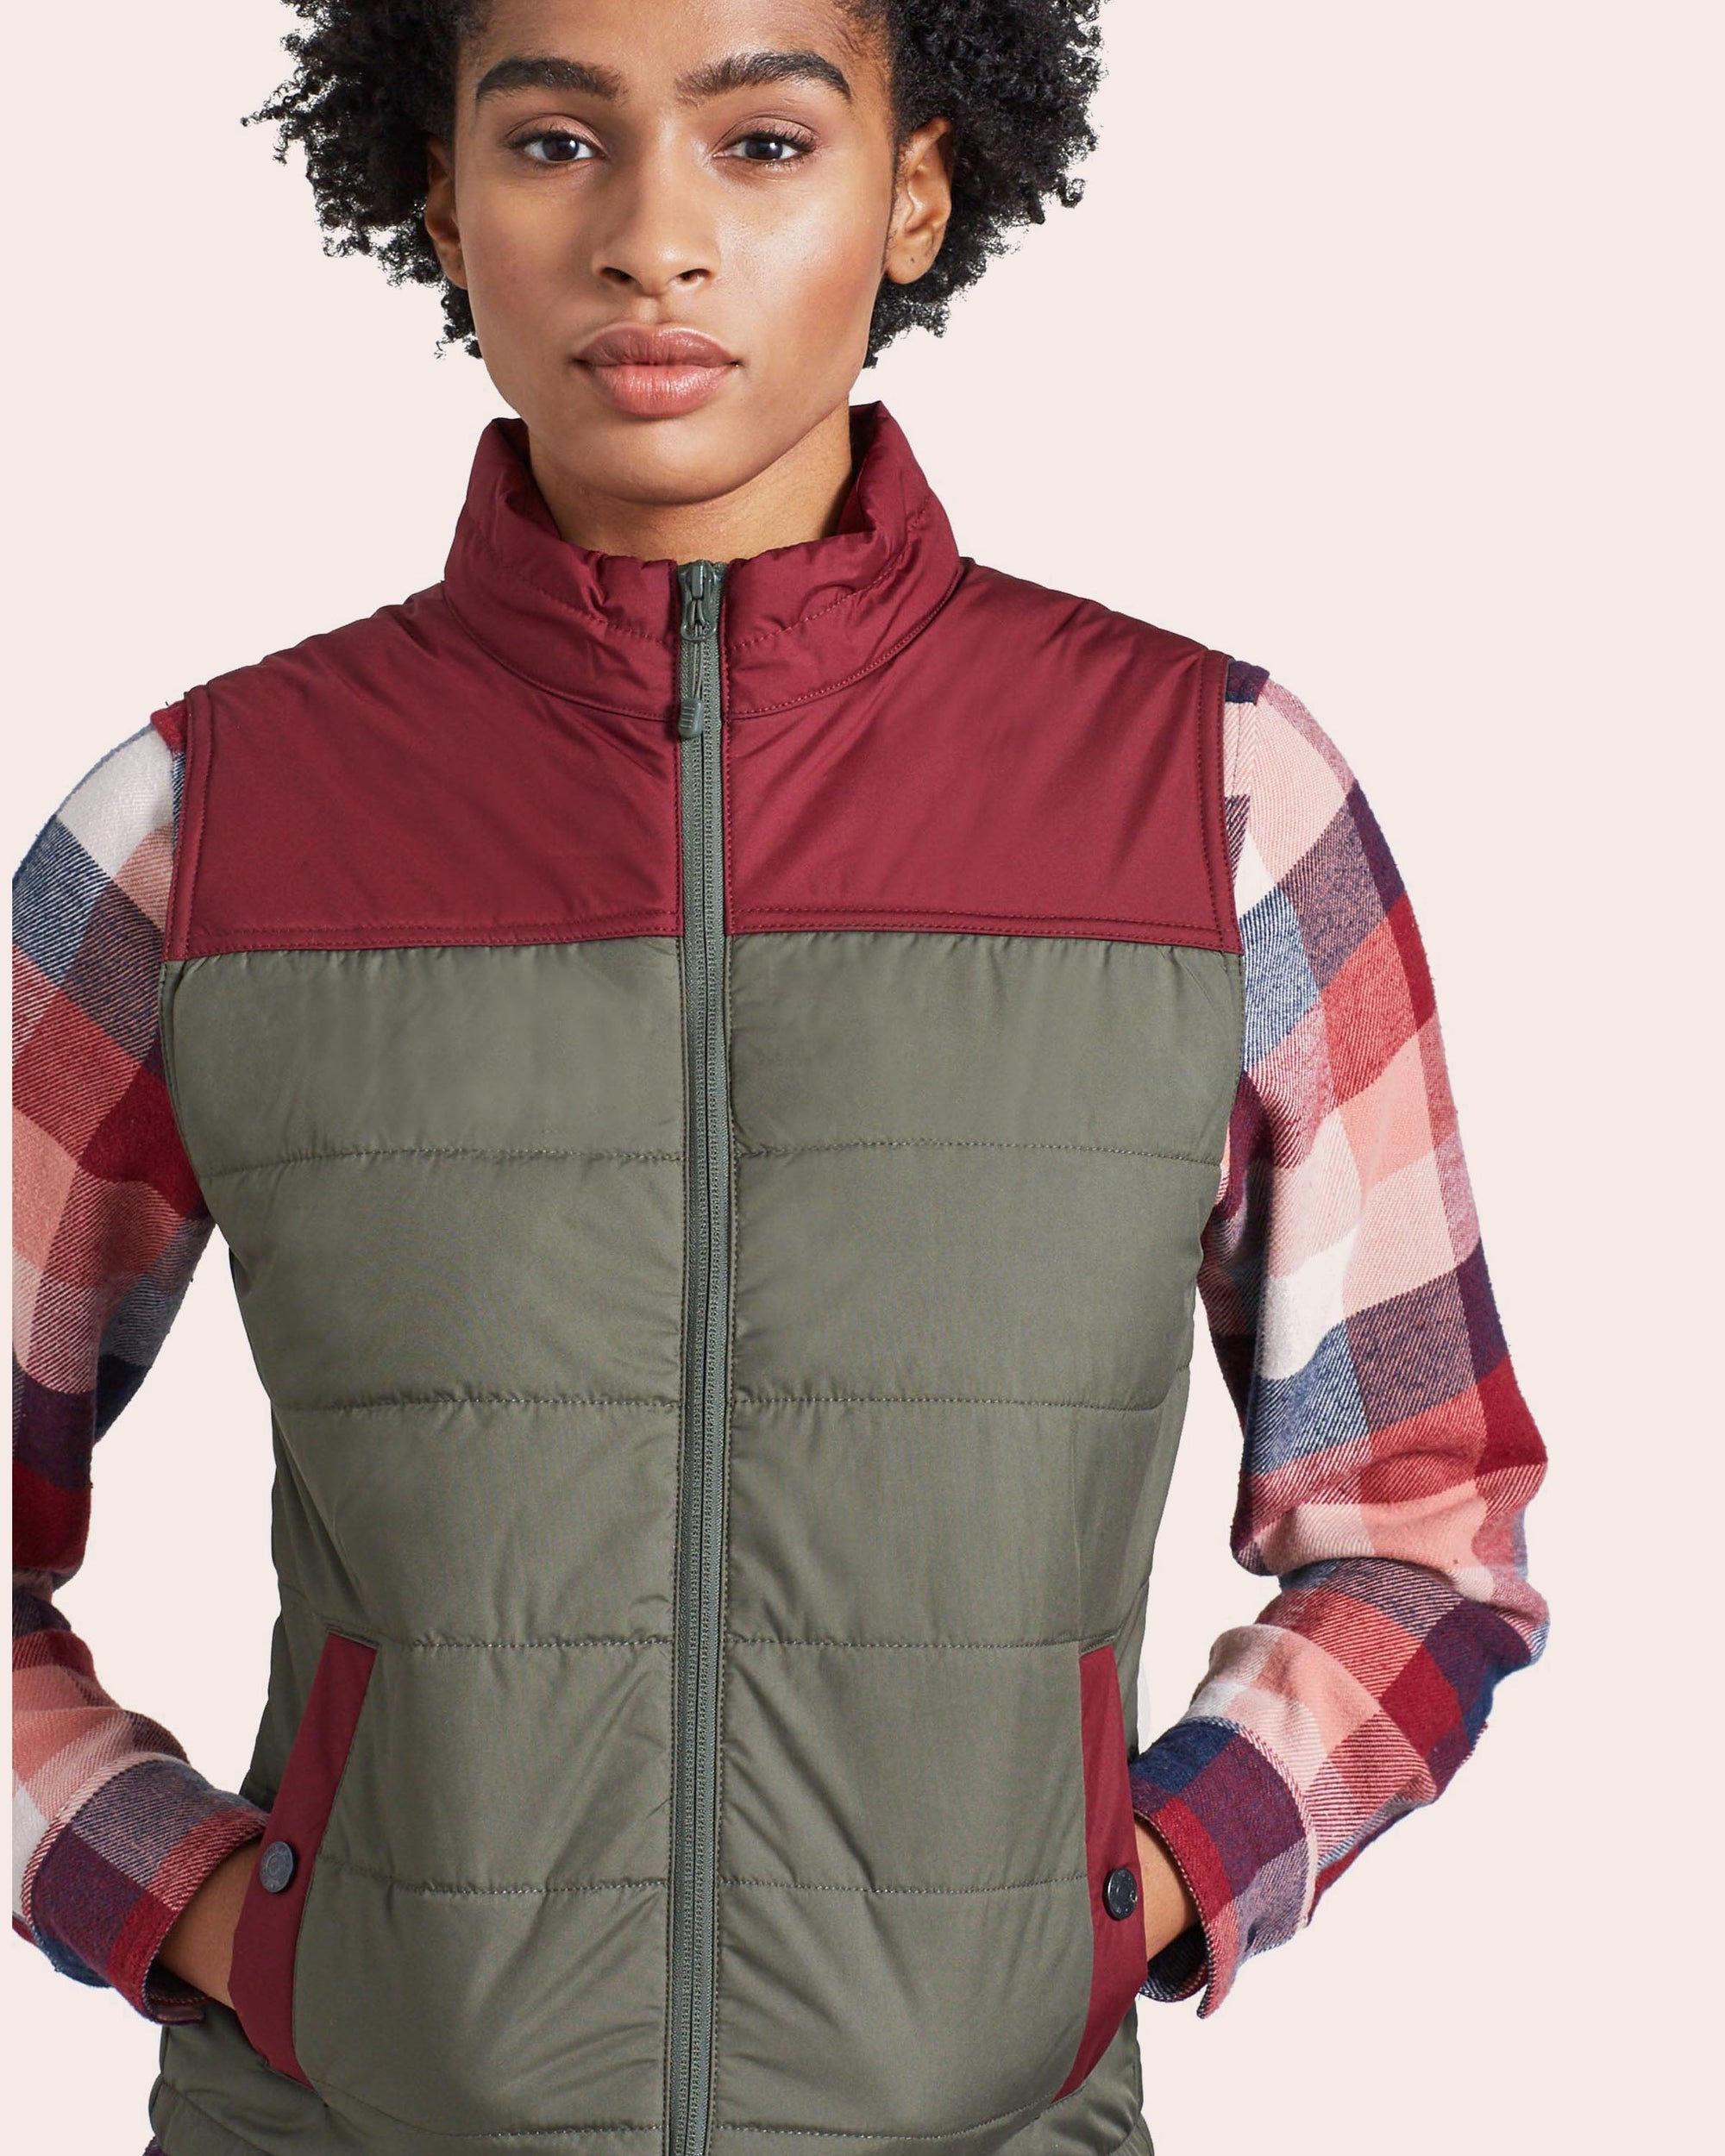 The Bison Puffer Vest